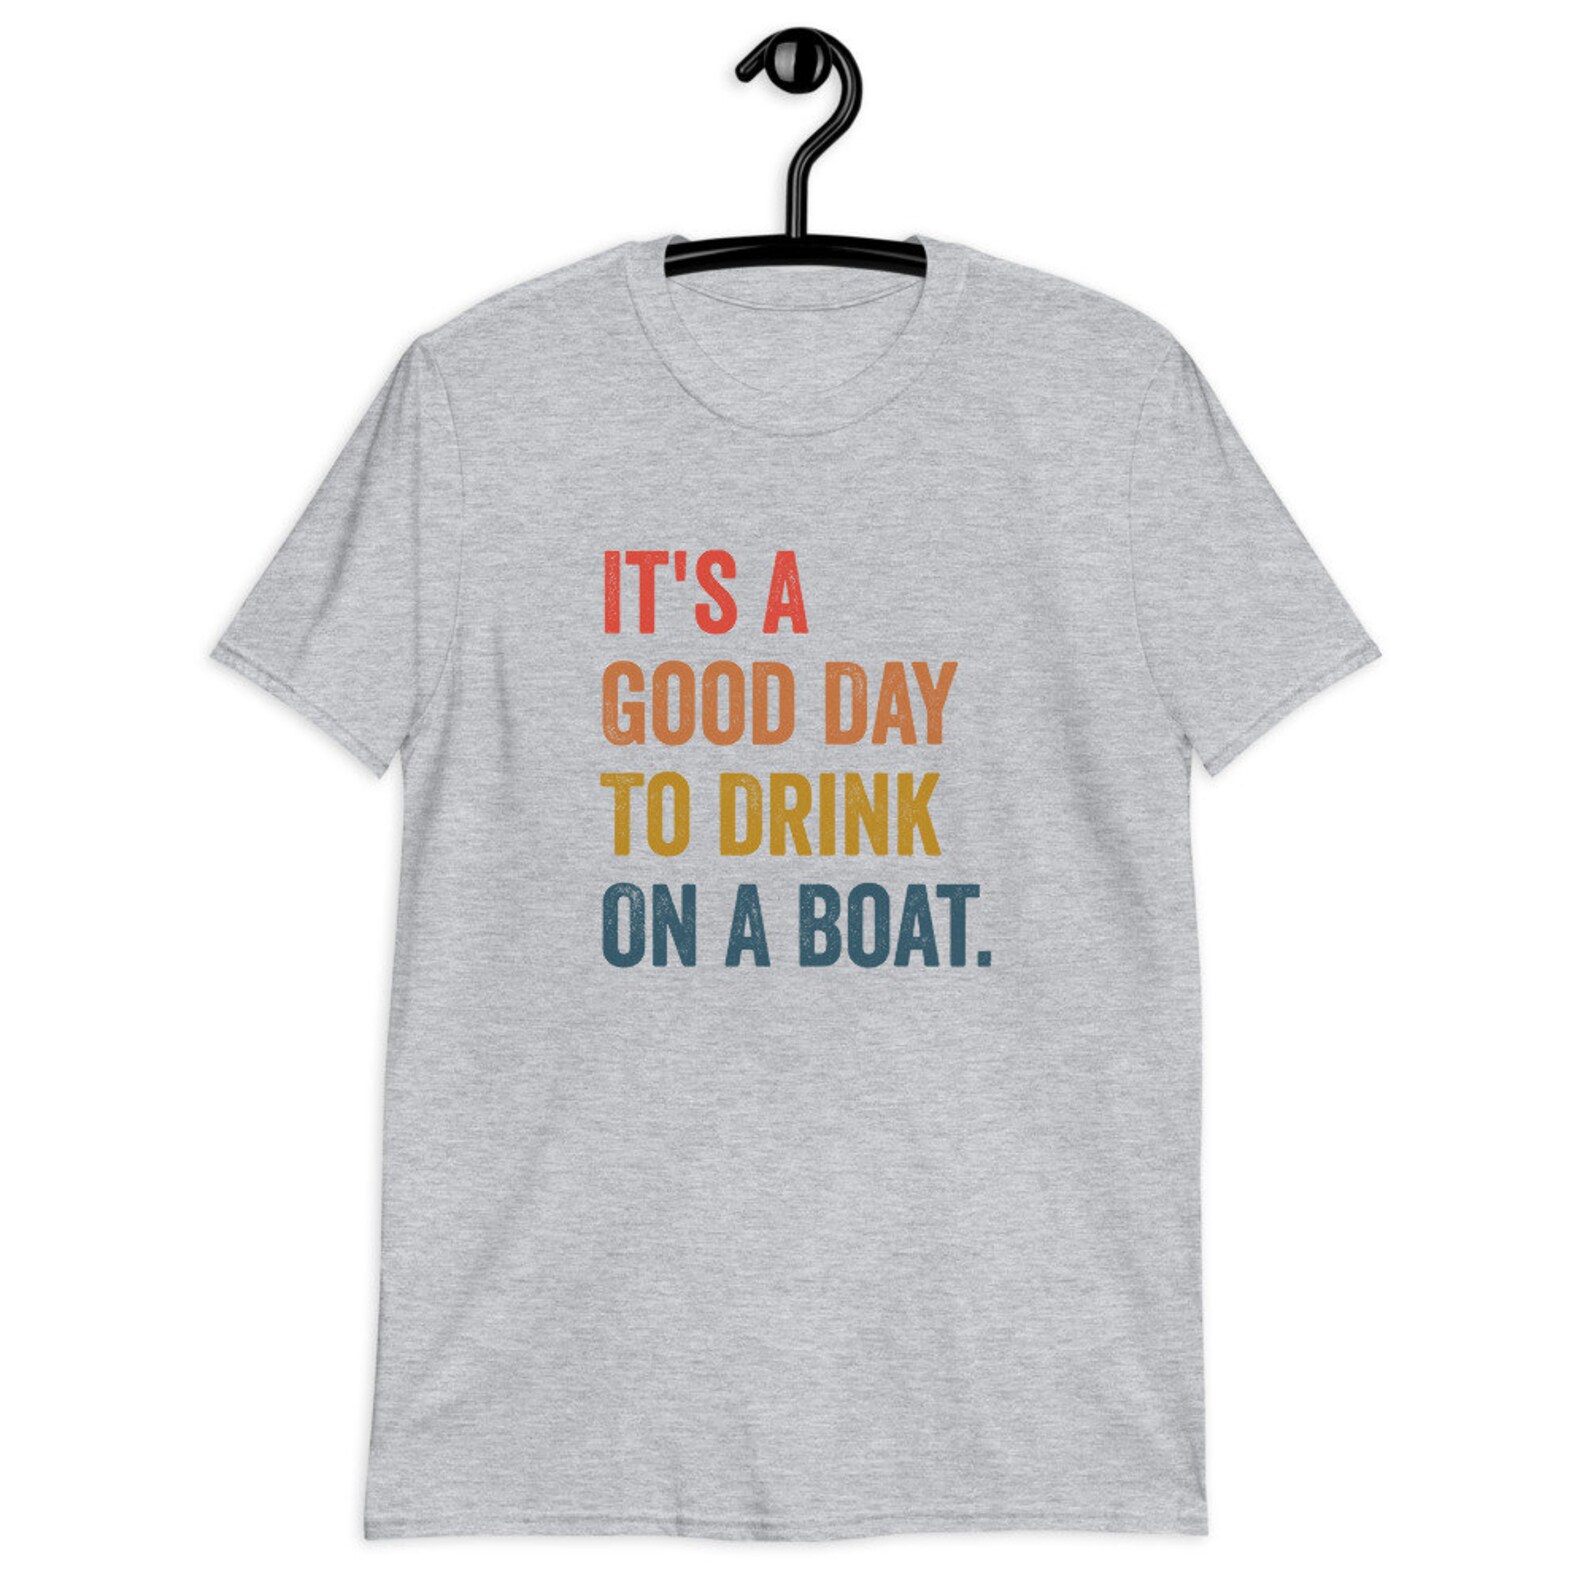 It's A Good Day to Drink on A Boat Shirt Cruise Shirt - Etsy